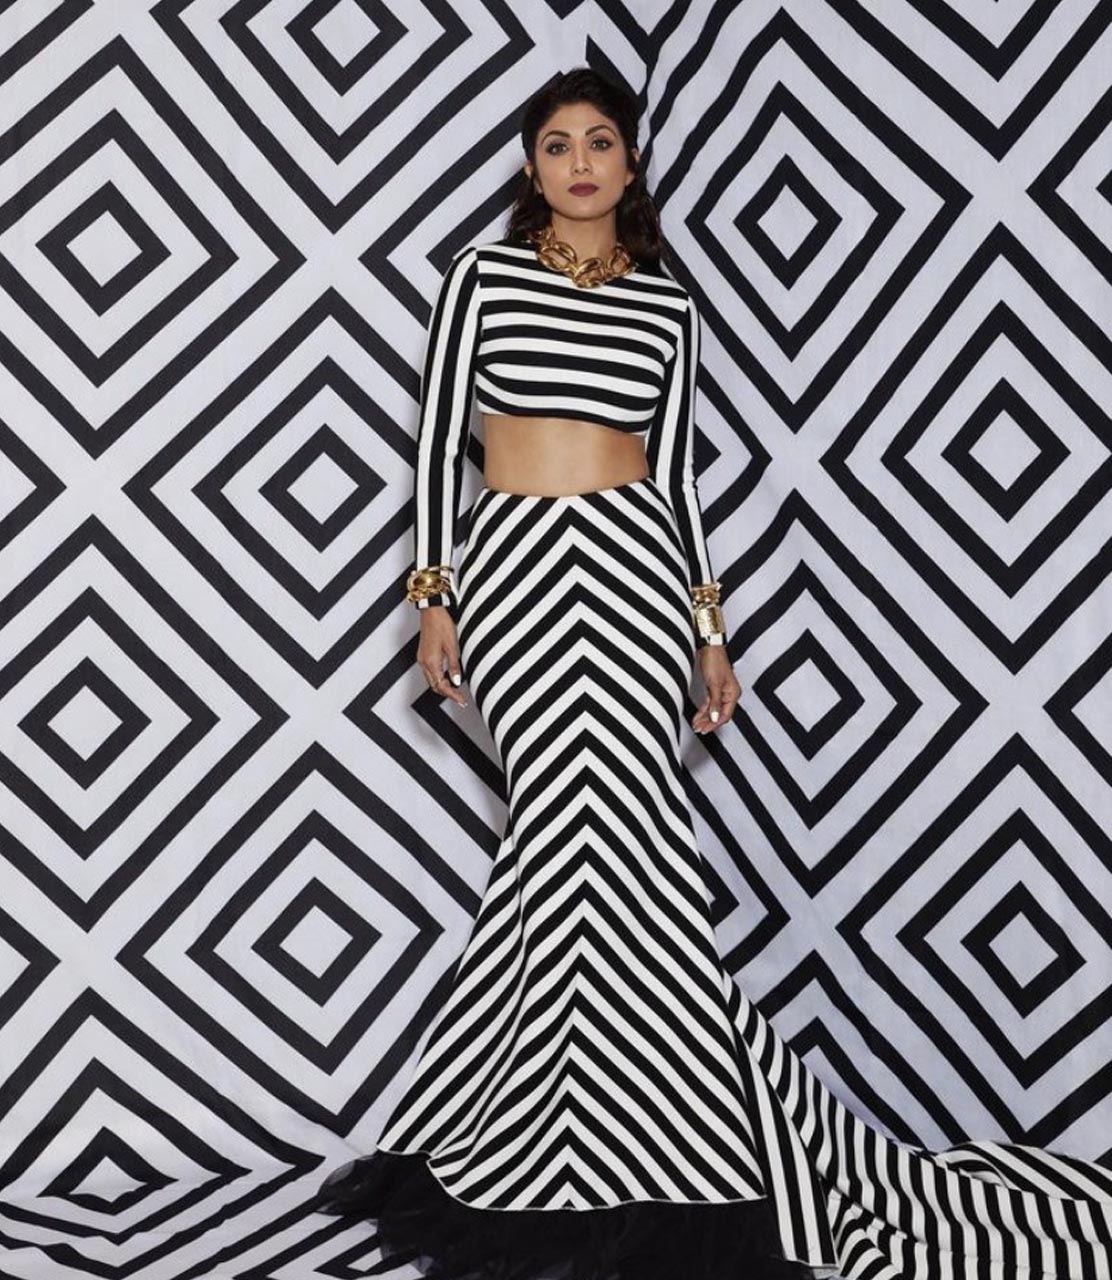 Shilpa Shetty makes stripes look chicer in a stunning striped skirt set by Gauri & Nainika